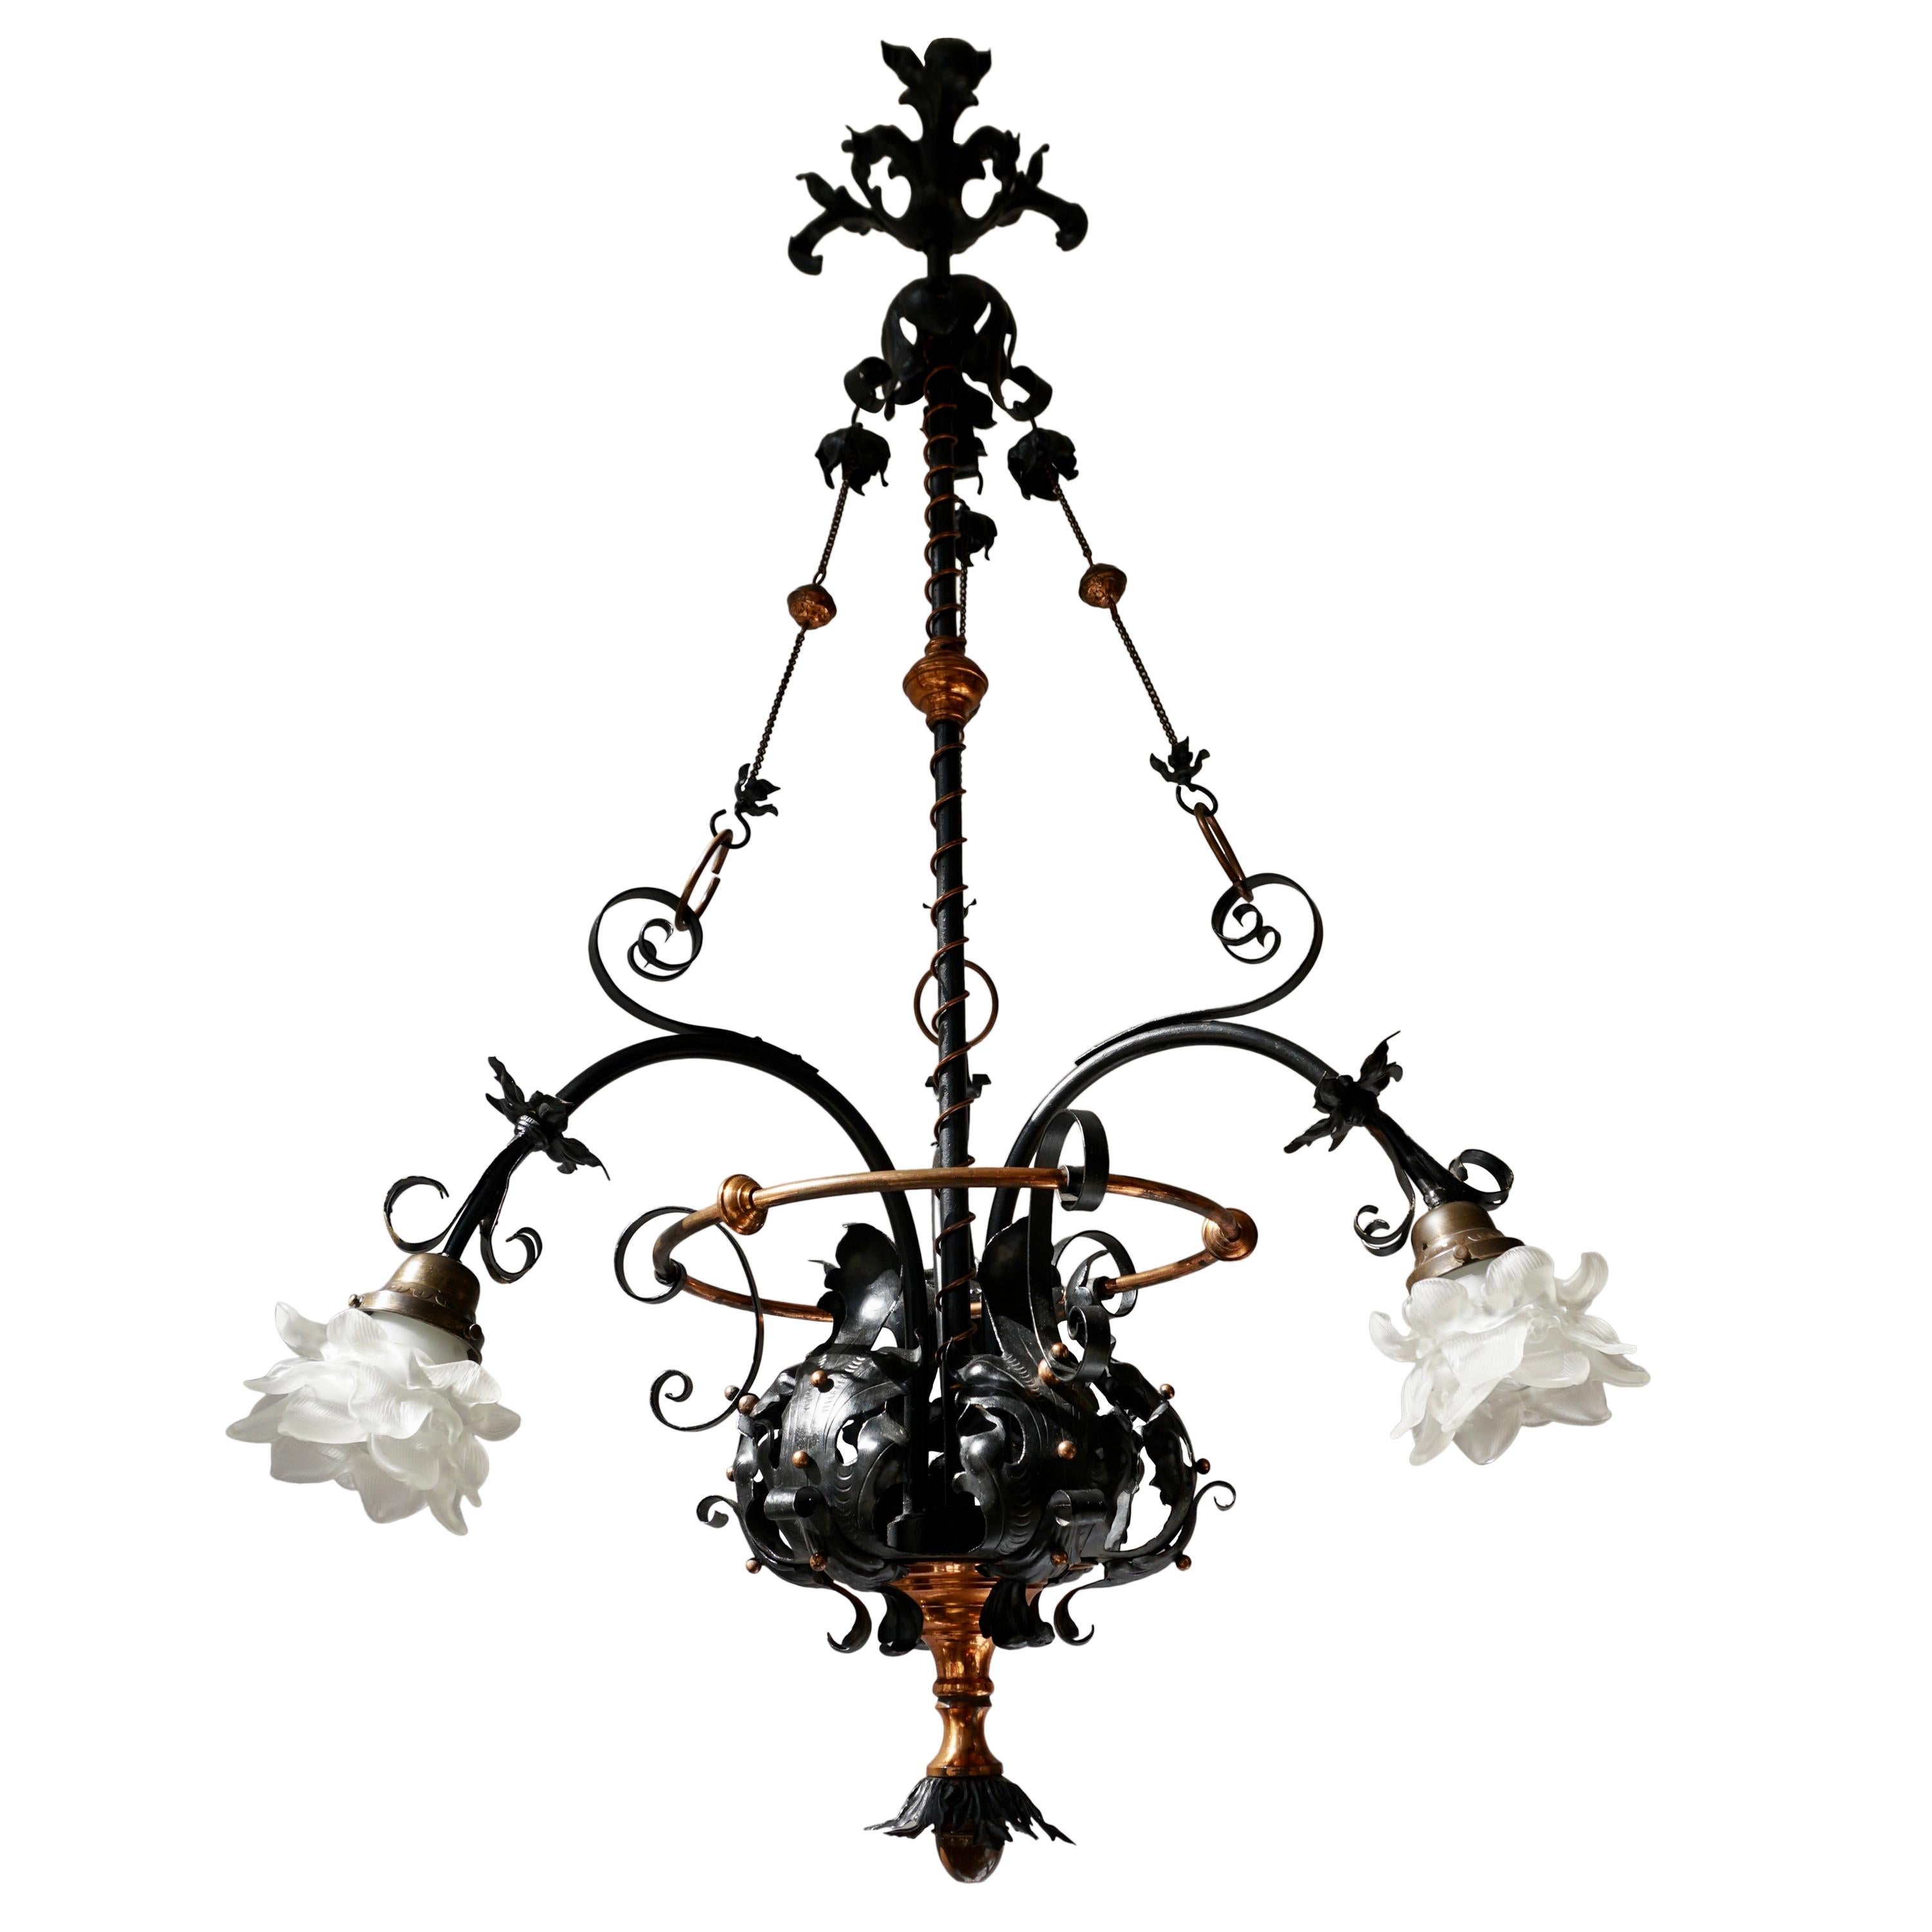 Chandelier in Wrought Iron and Brass